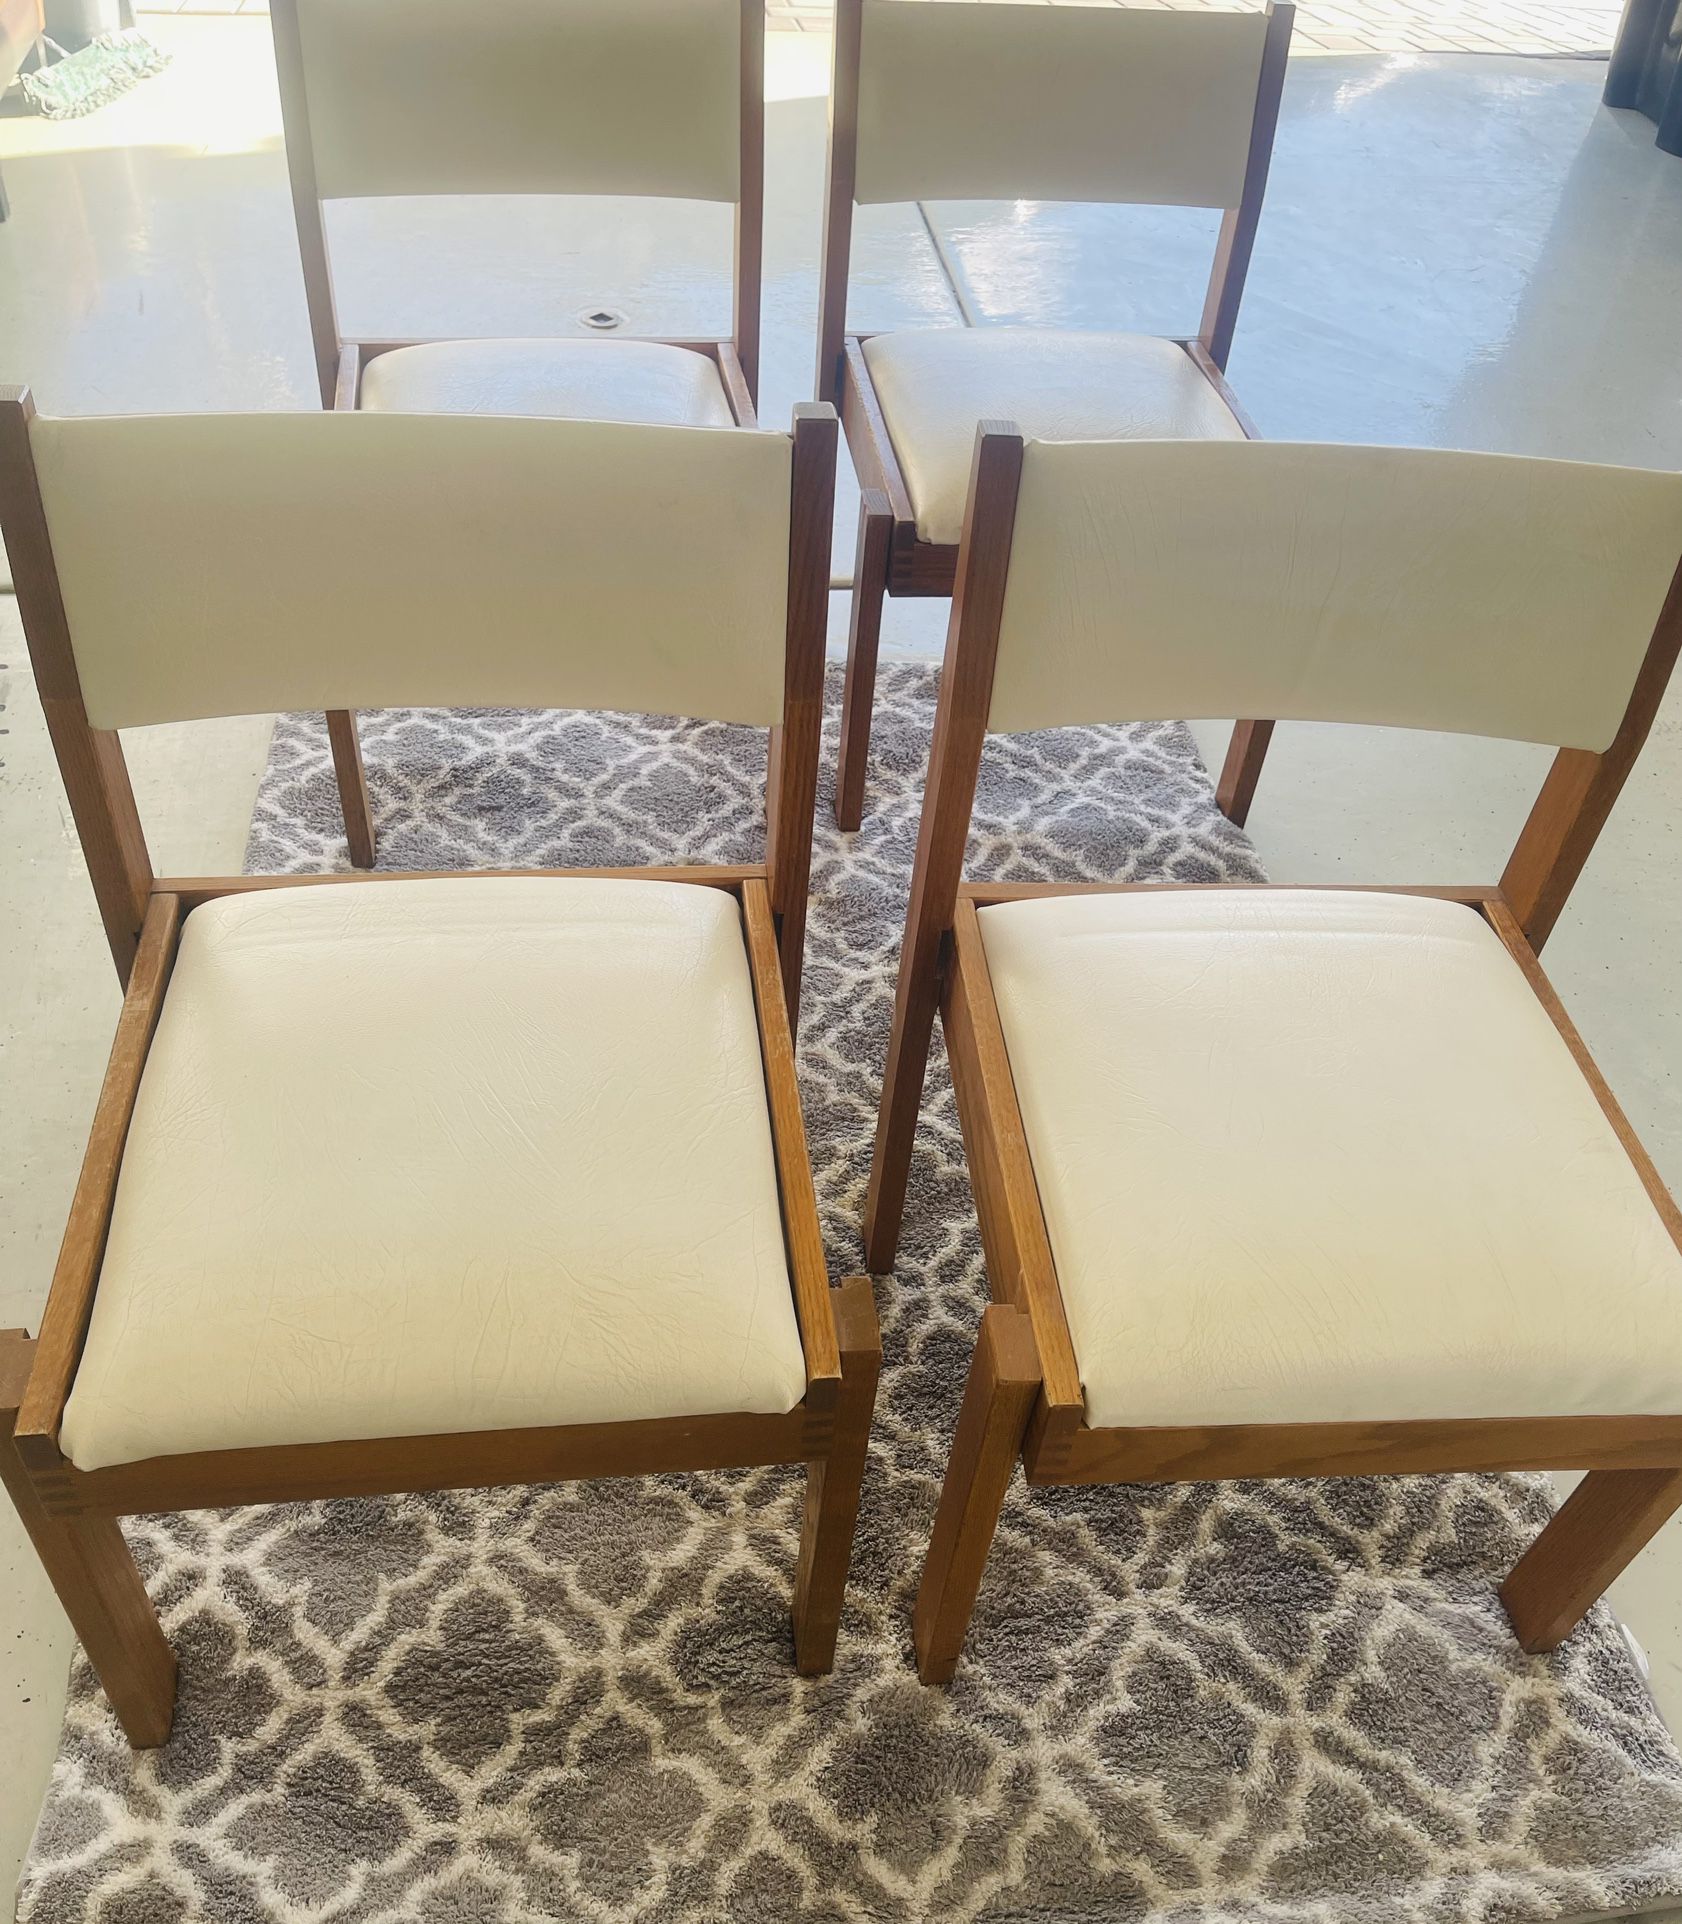 Cream Leather Wooden Chairs 4 